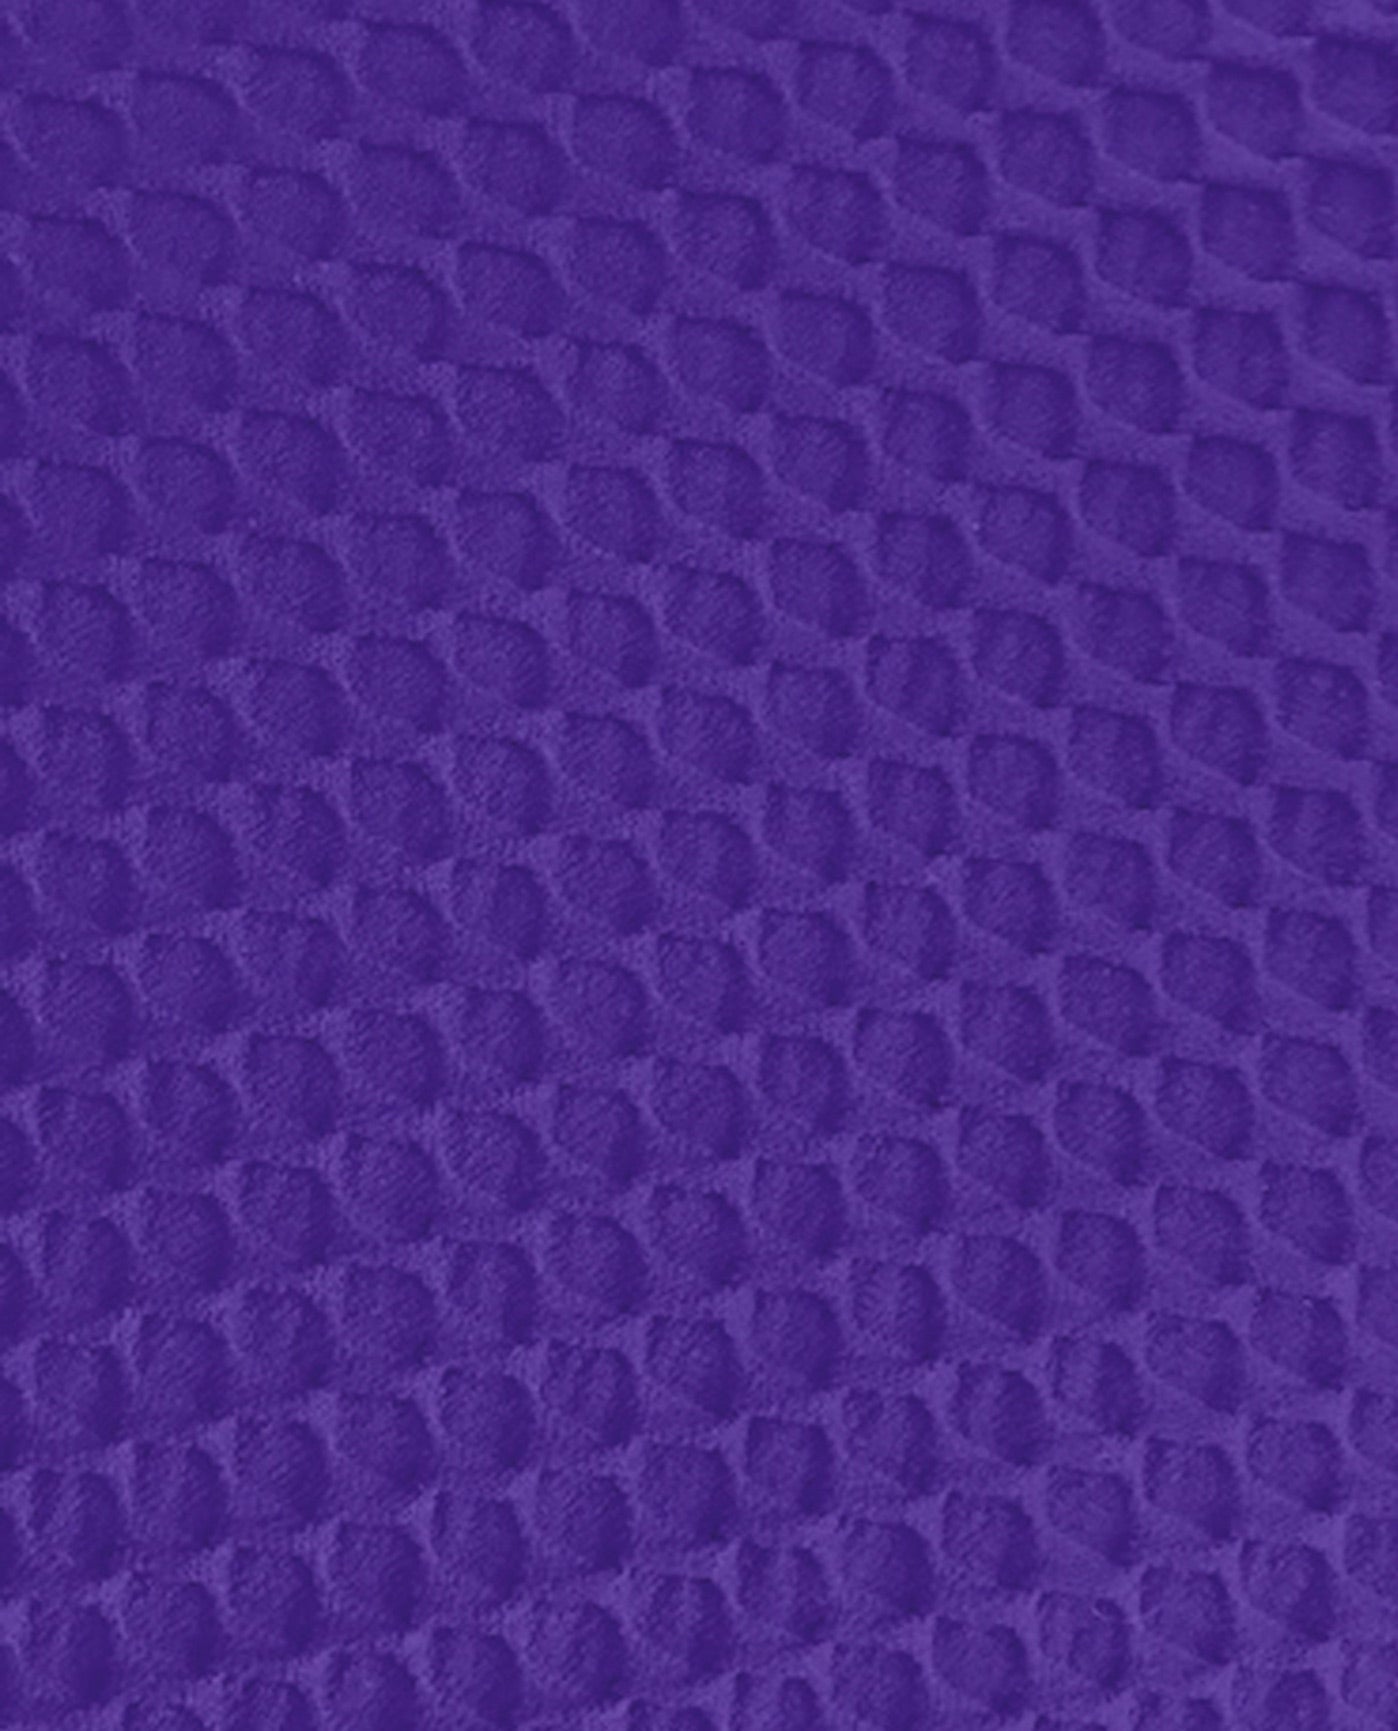 FABRIC SWATCH VIEW OF CHLORINE RESISTANT AQUAMORE COLOR BLOCK TEXTURED HIGH NECK ONE PIECE SWIMSUIT | 607 AQT TEXTURED PURPLE